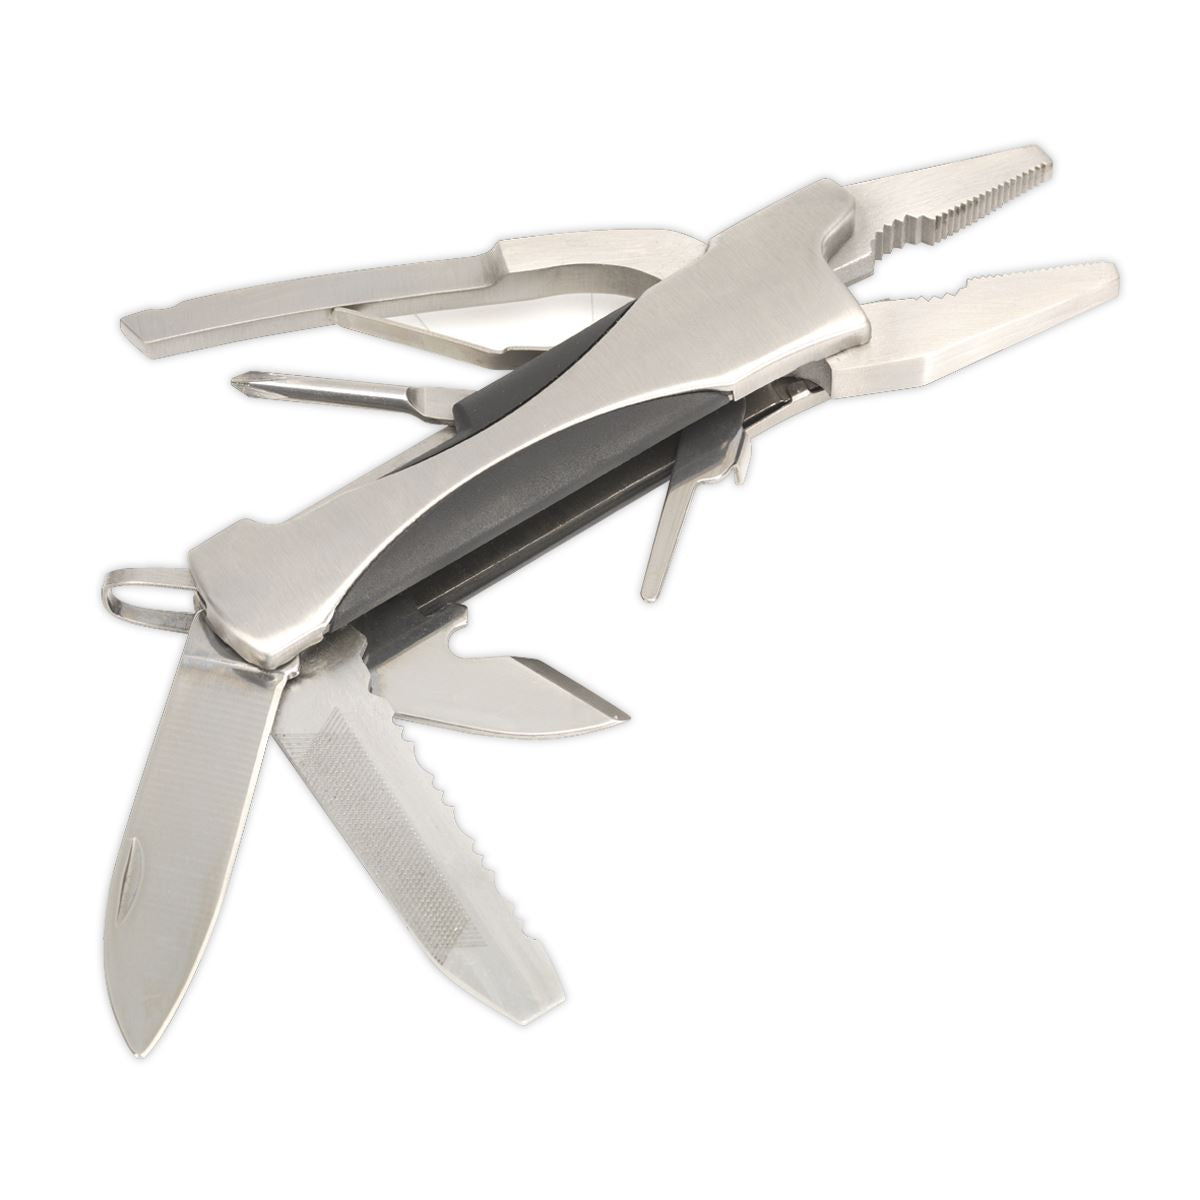 Sealey 10 Function Multi Tool Stainless Steel Lightweight Pocket